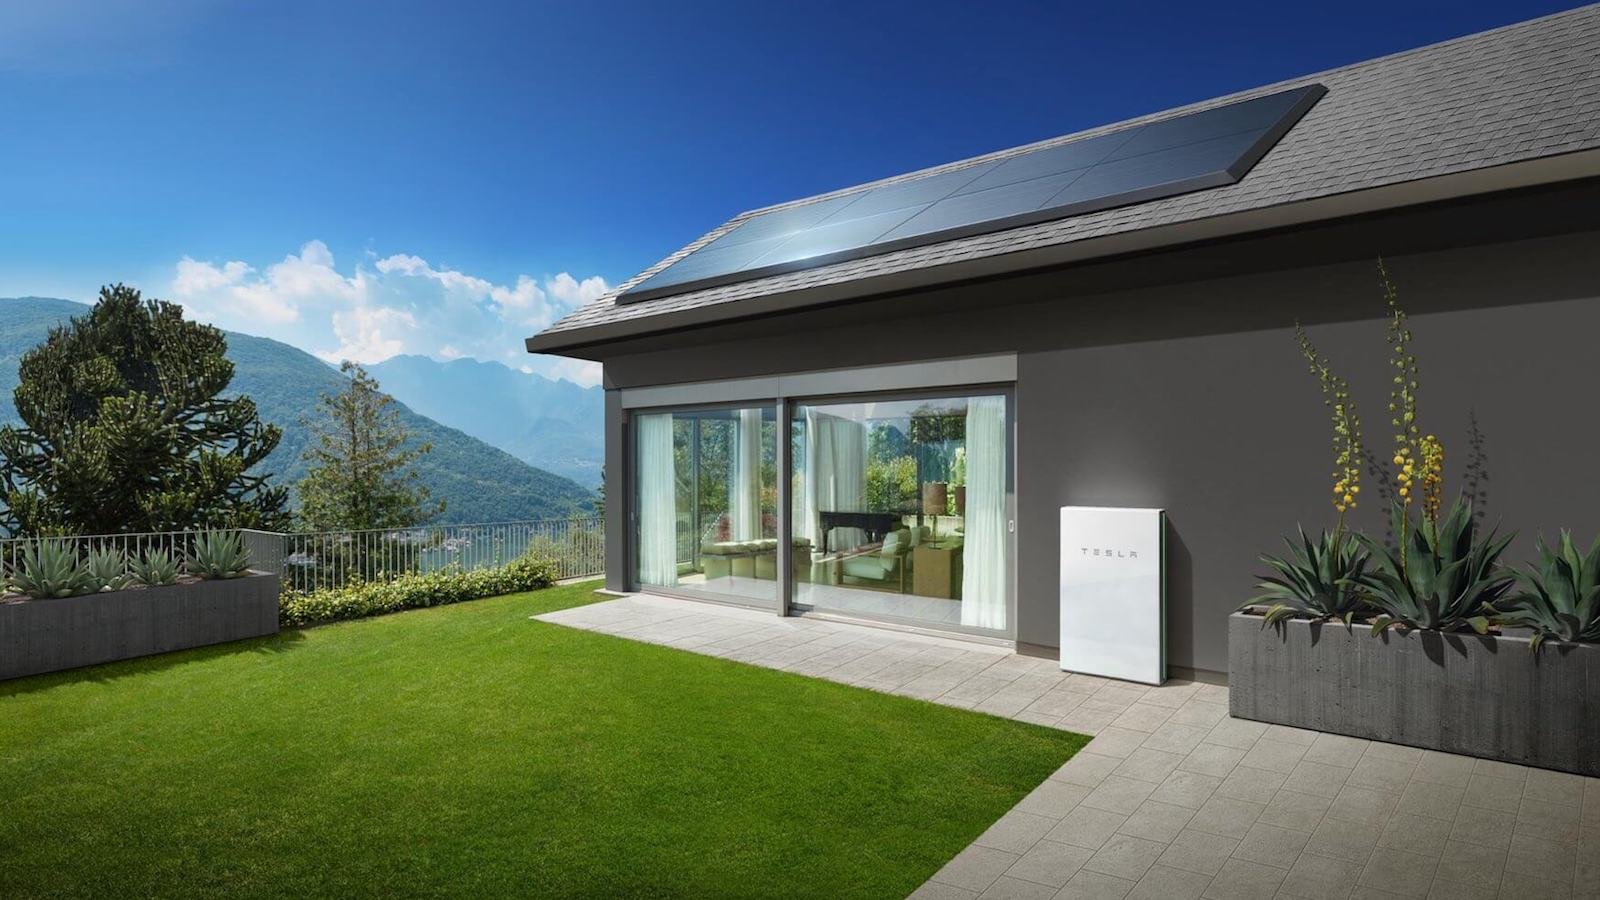 Tesla Solar Panels Rooftop Power Supply lets you take control of your energy bills